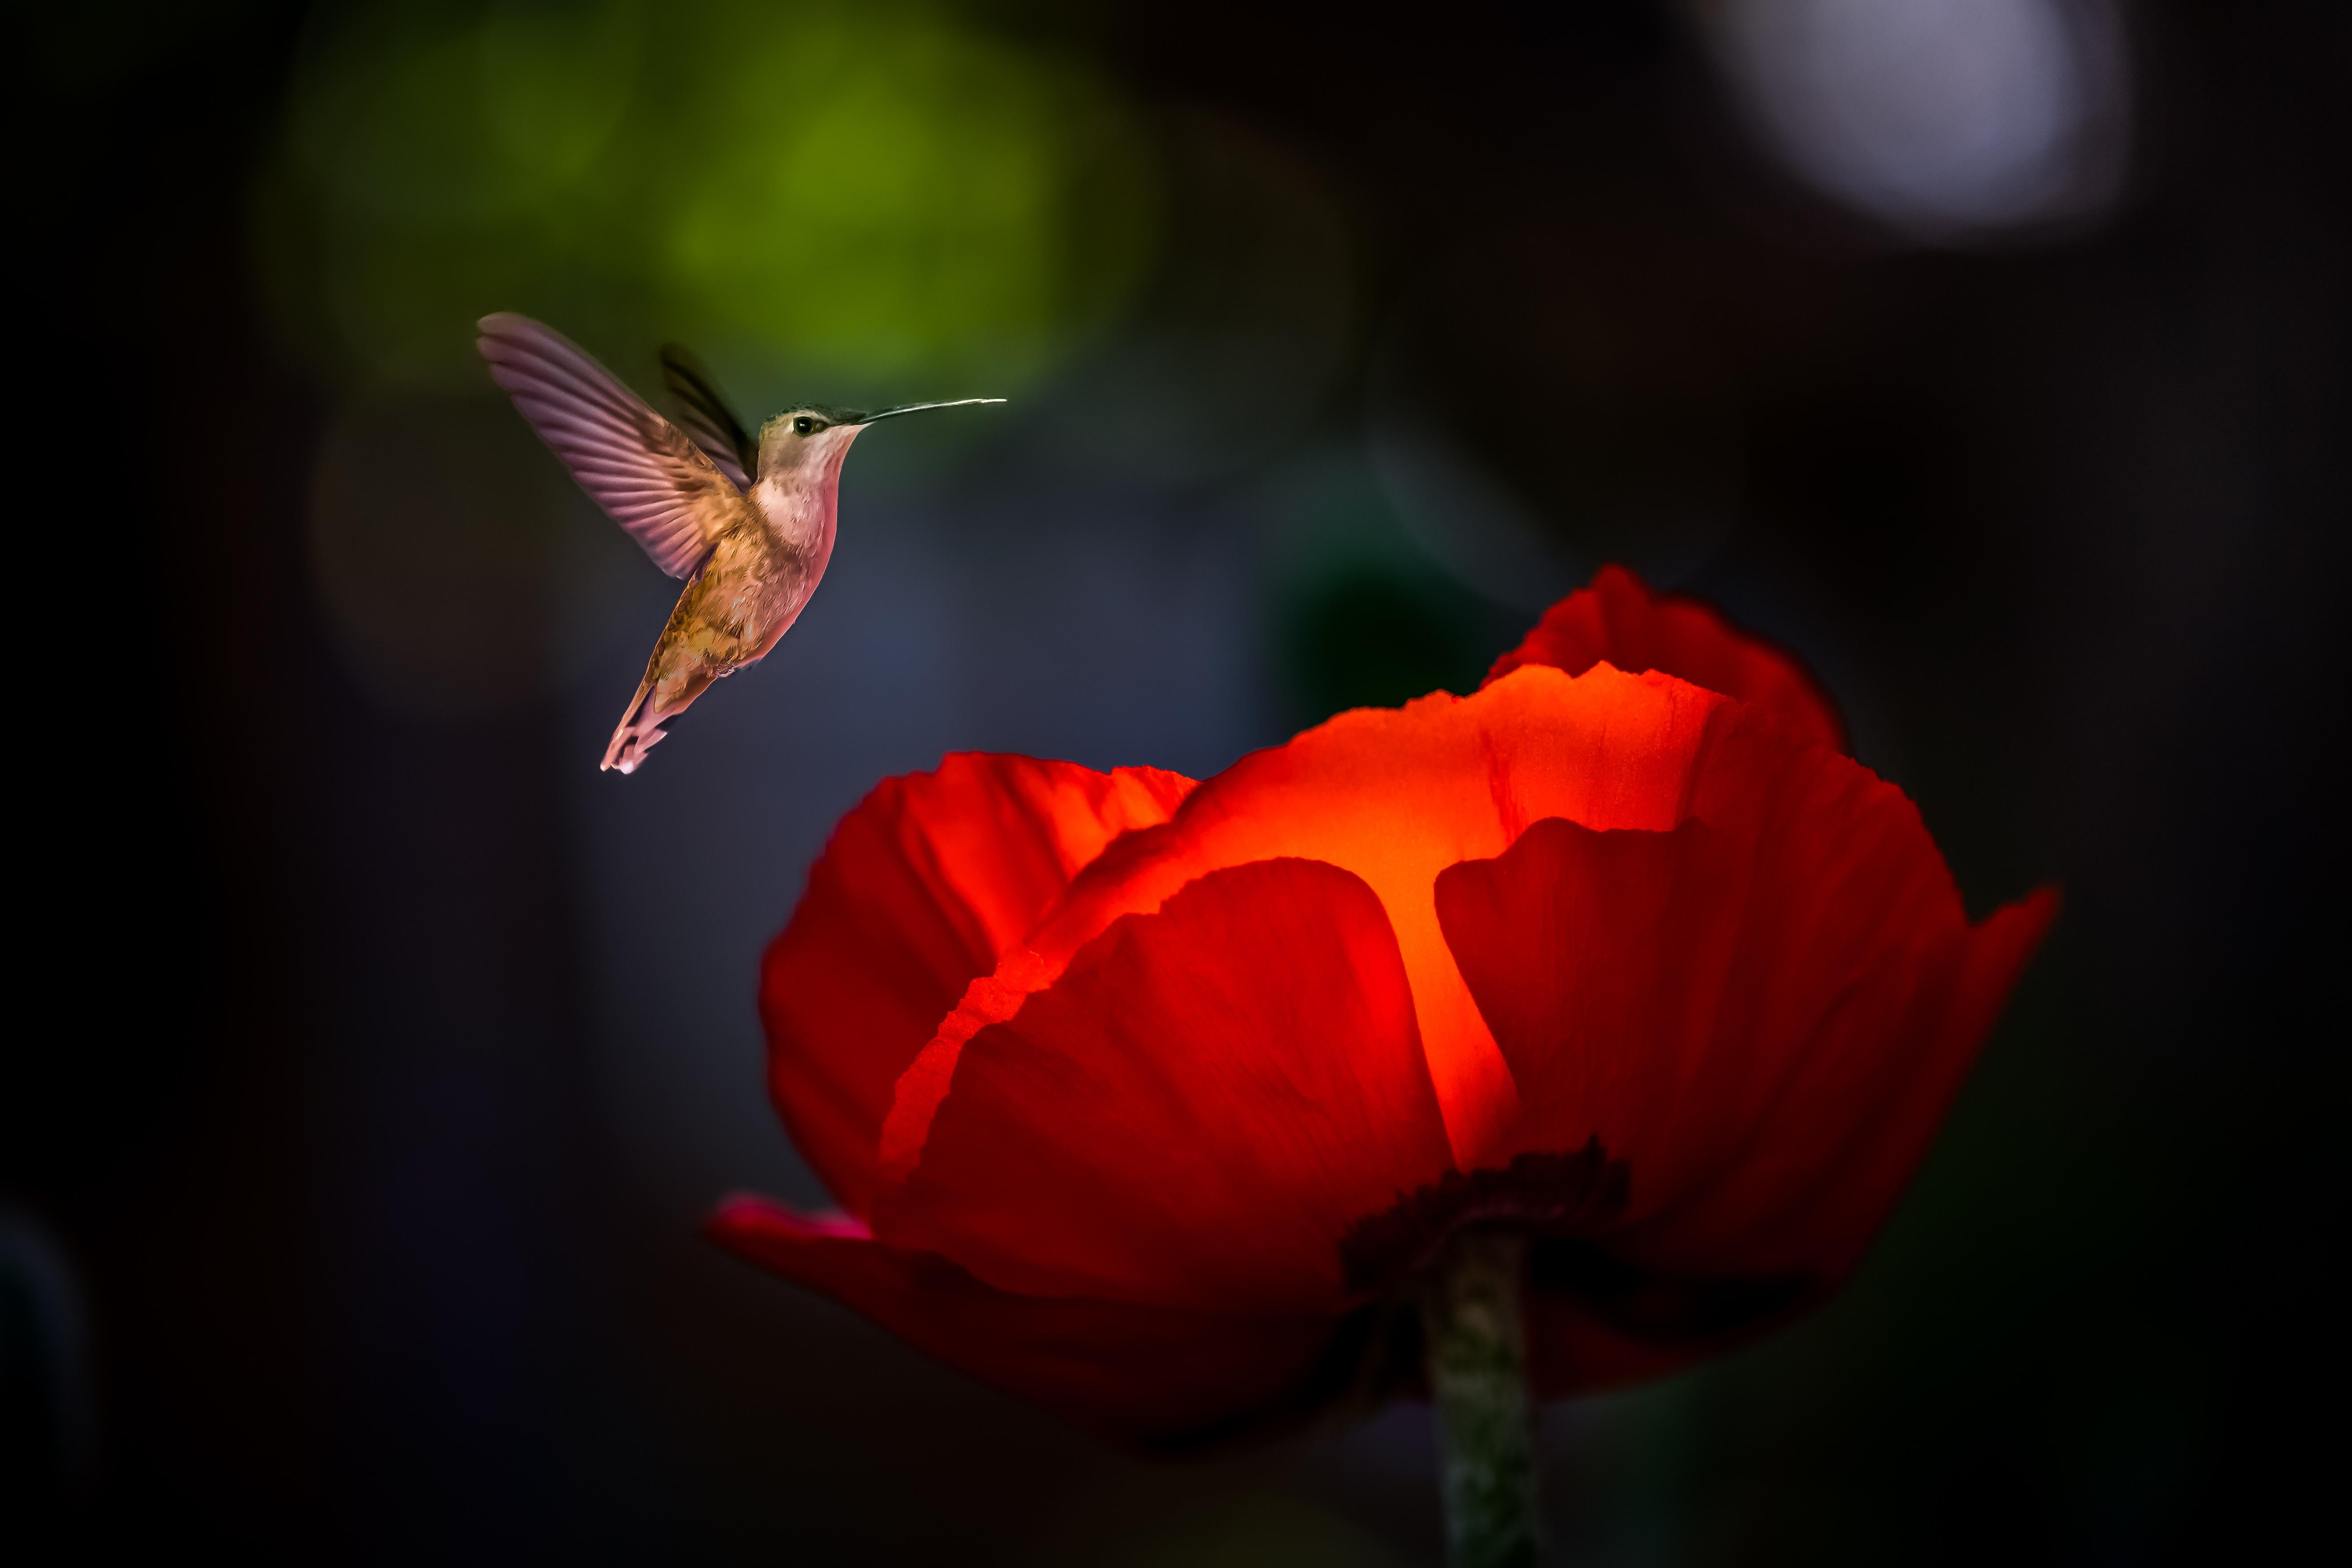 " Preparation meets opportunity!

I was staying in this airbnb in Taos, NM that had a beautiful garden that had just started to bloom. I also noticed hummingbirds that would come into the garden for the flowers and the feeders. So I watched and